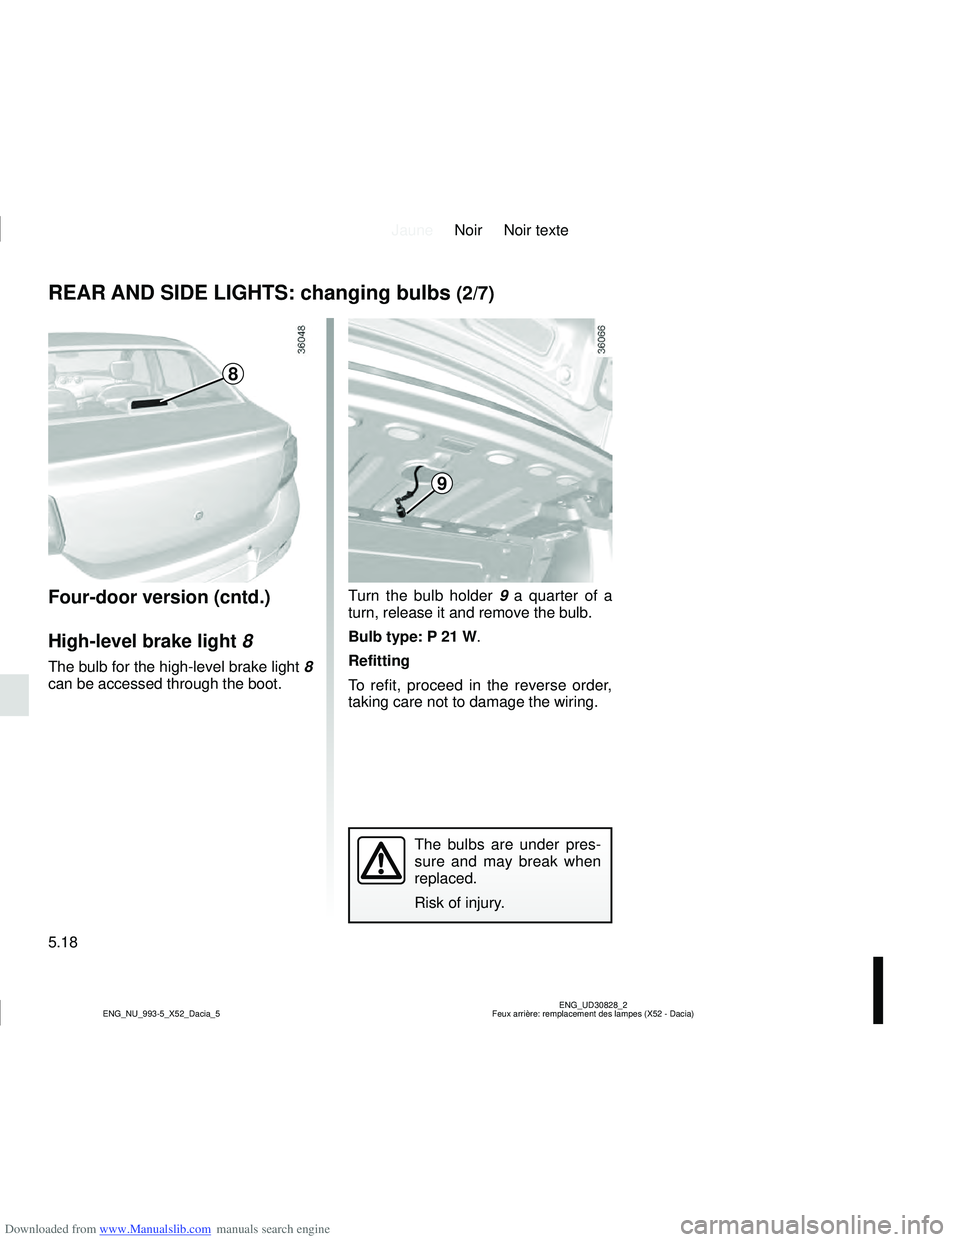 DACIA SANDERO 2018  Owners Manual Downloaded from www.Manualslib.com manuals search engine JauneNoir Noir texte
5.18
ENG_UD30828_2
Feux arrière: remplacement des lampes (X52 - Dacia)
ENG_NU_993-5_X52_Dacia_5
REAR AND SIDE LIGHTS: cha